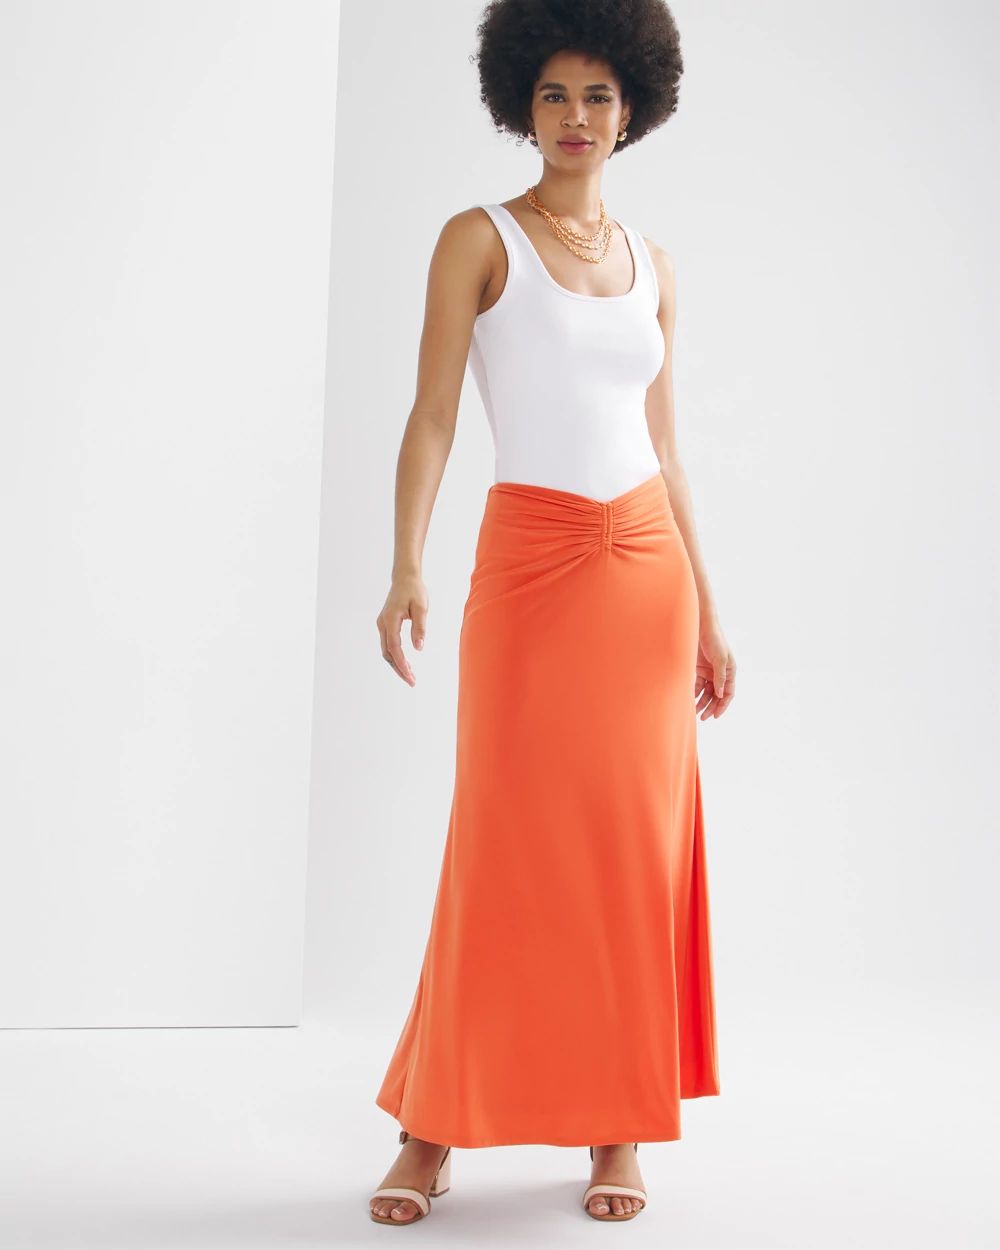 Ruched Maxi Skirt click to view larger image.